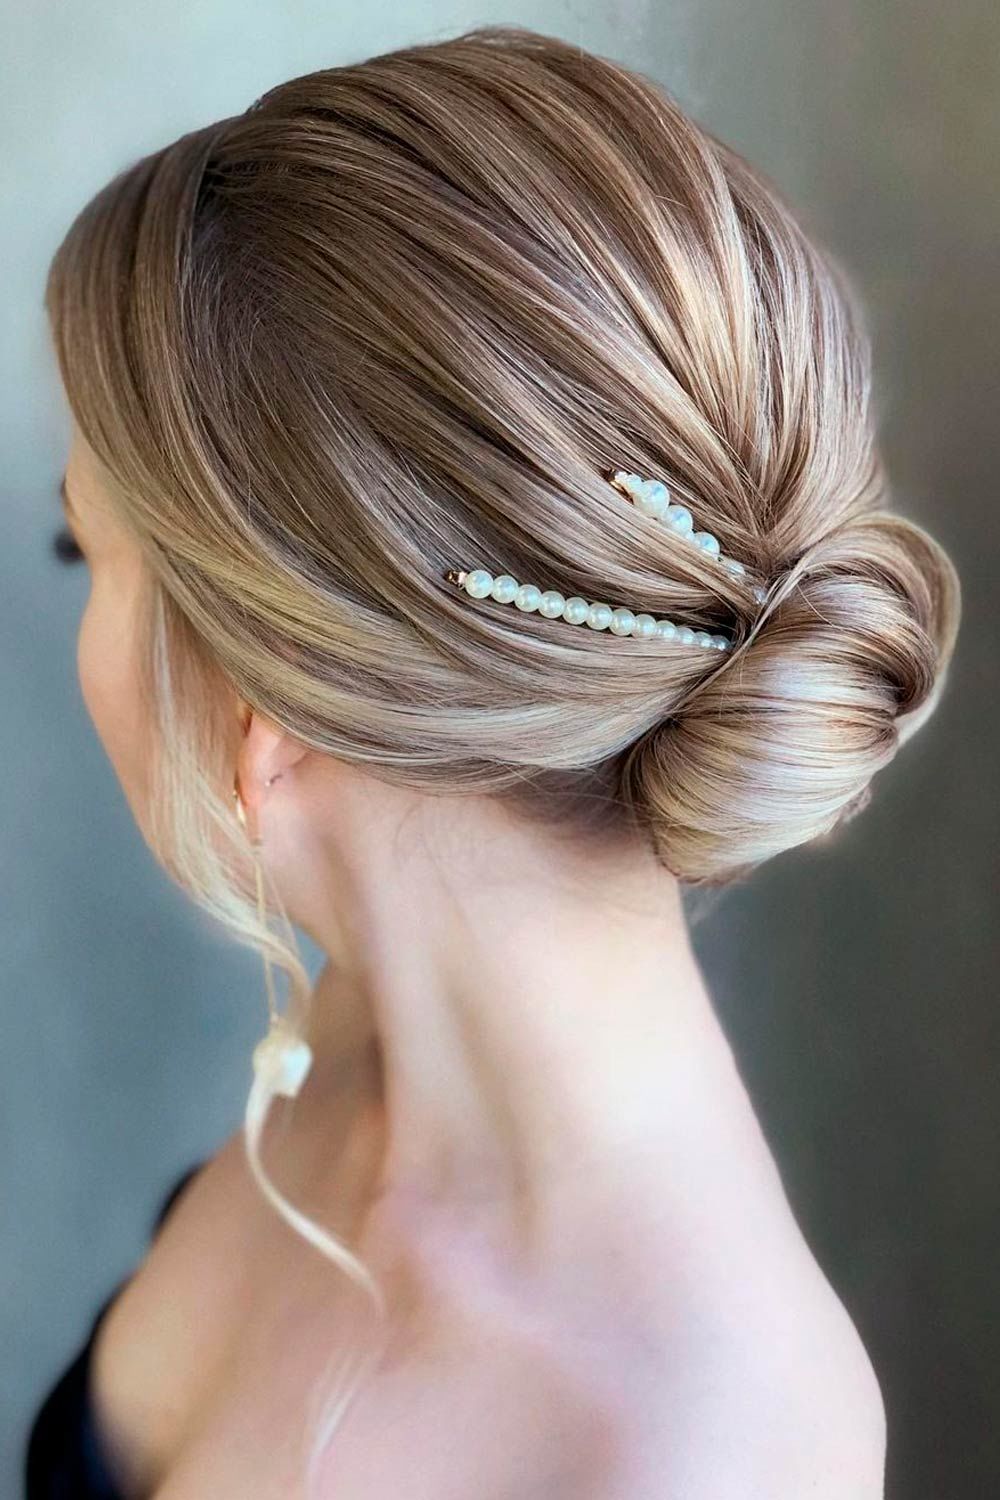 Simple Low Buns Hairstyle